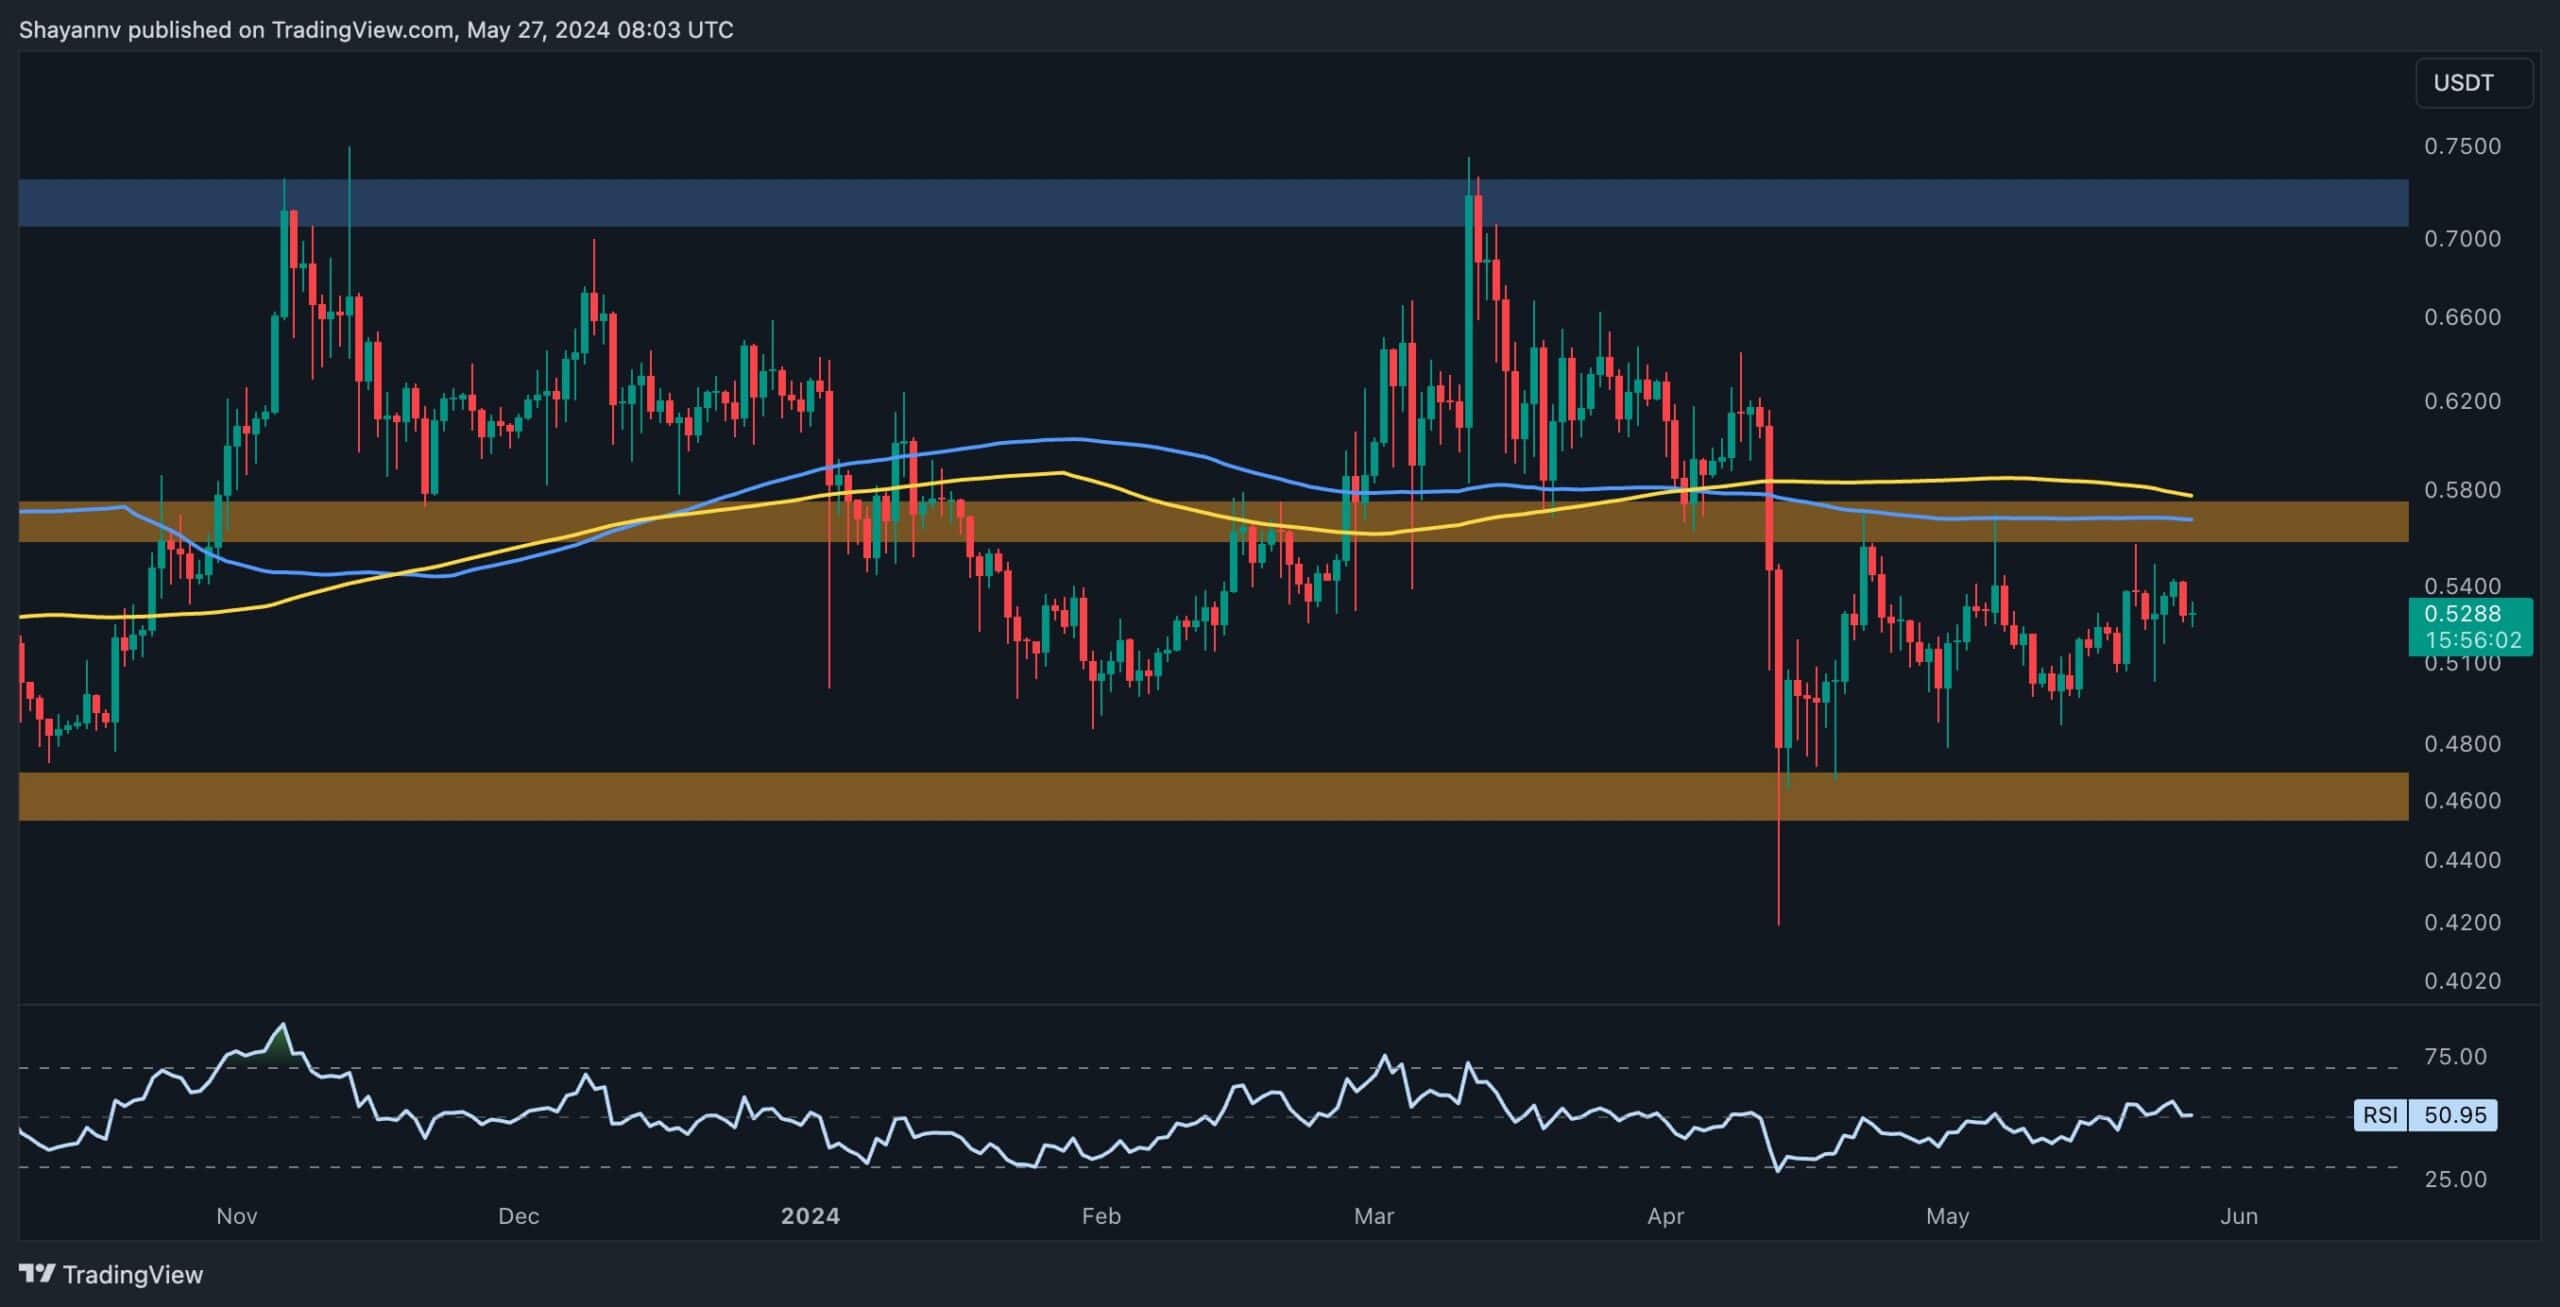 Calm Before The Storm? XRP’s Price Stagnates But Certain Worrying Factors Emerge: Ripple Price Analysis